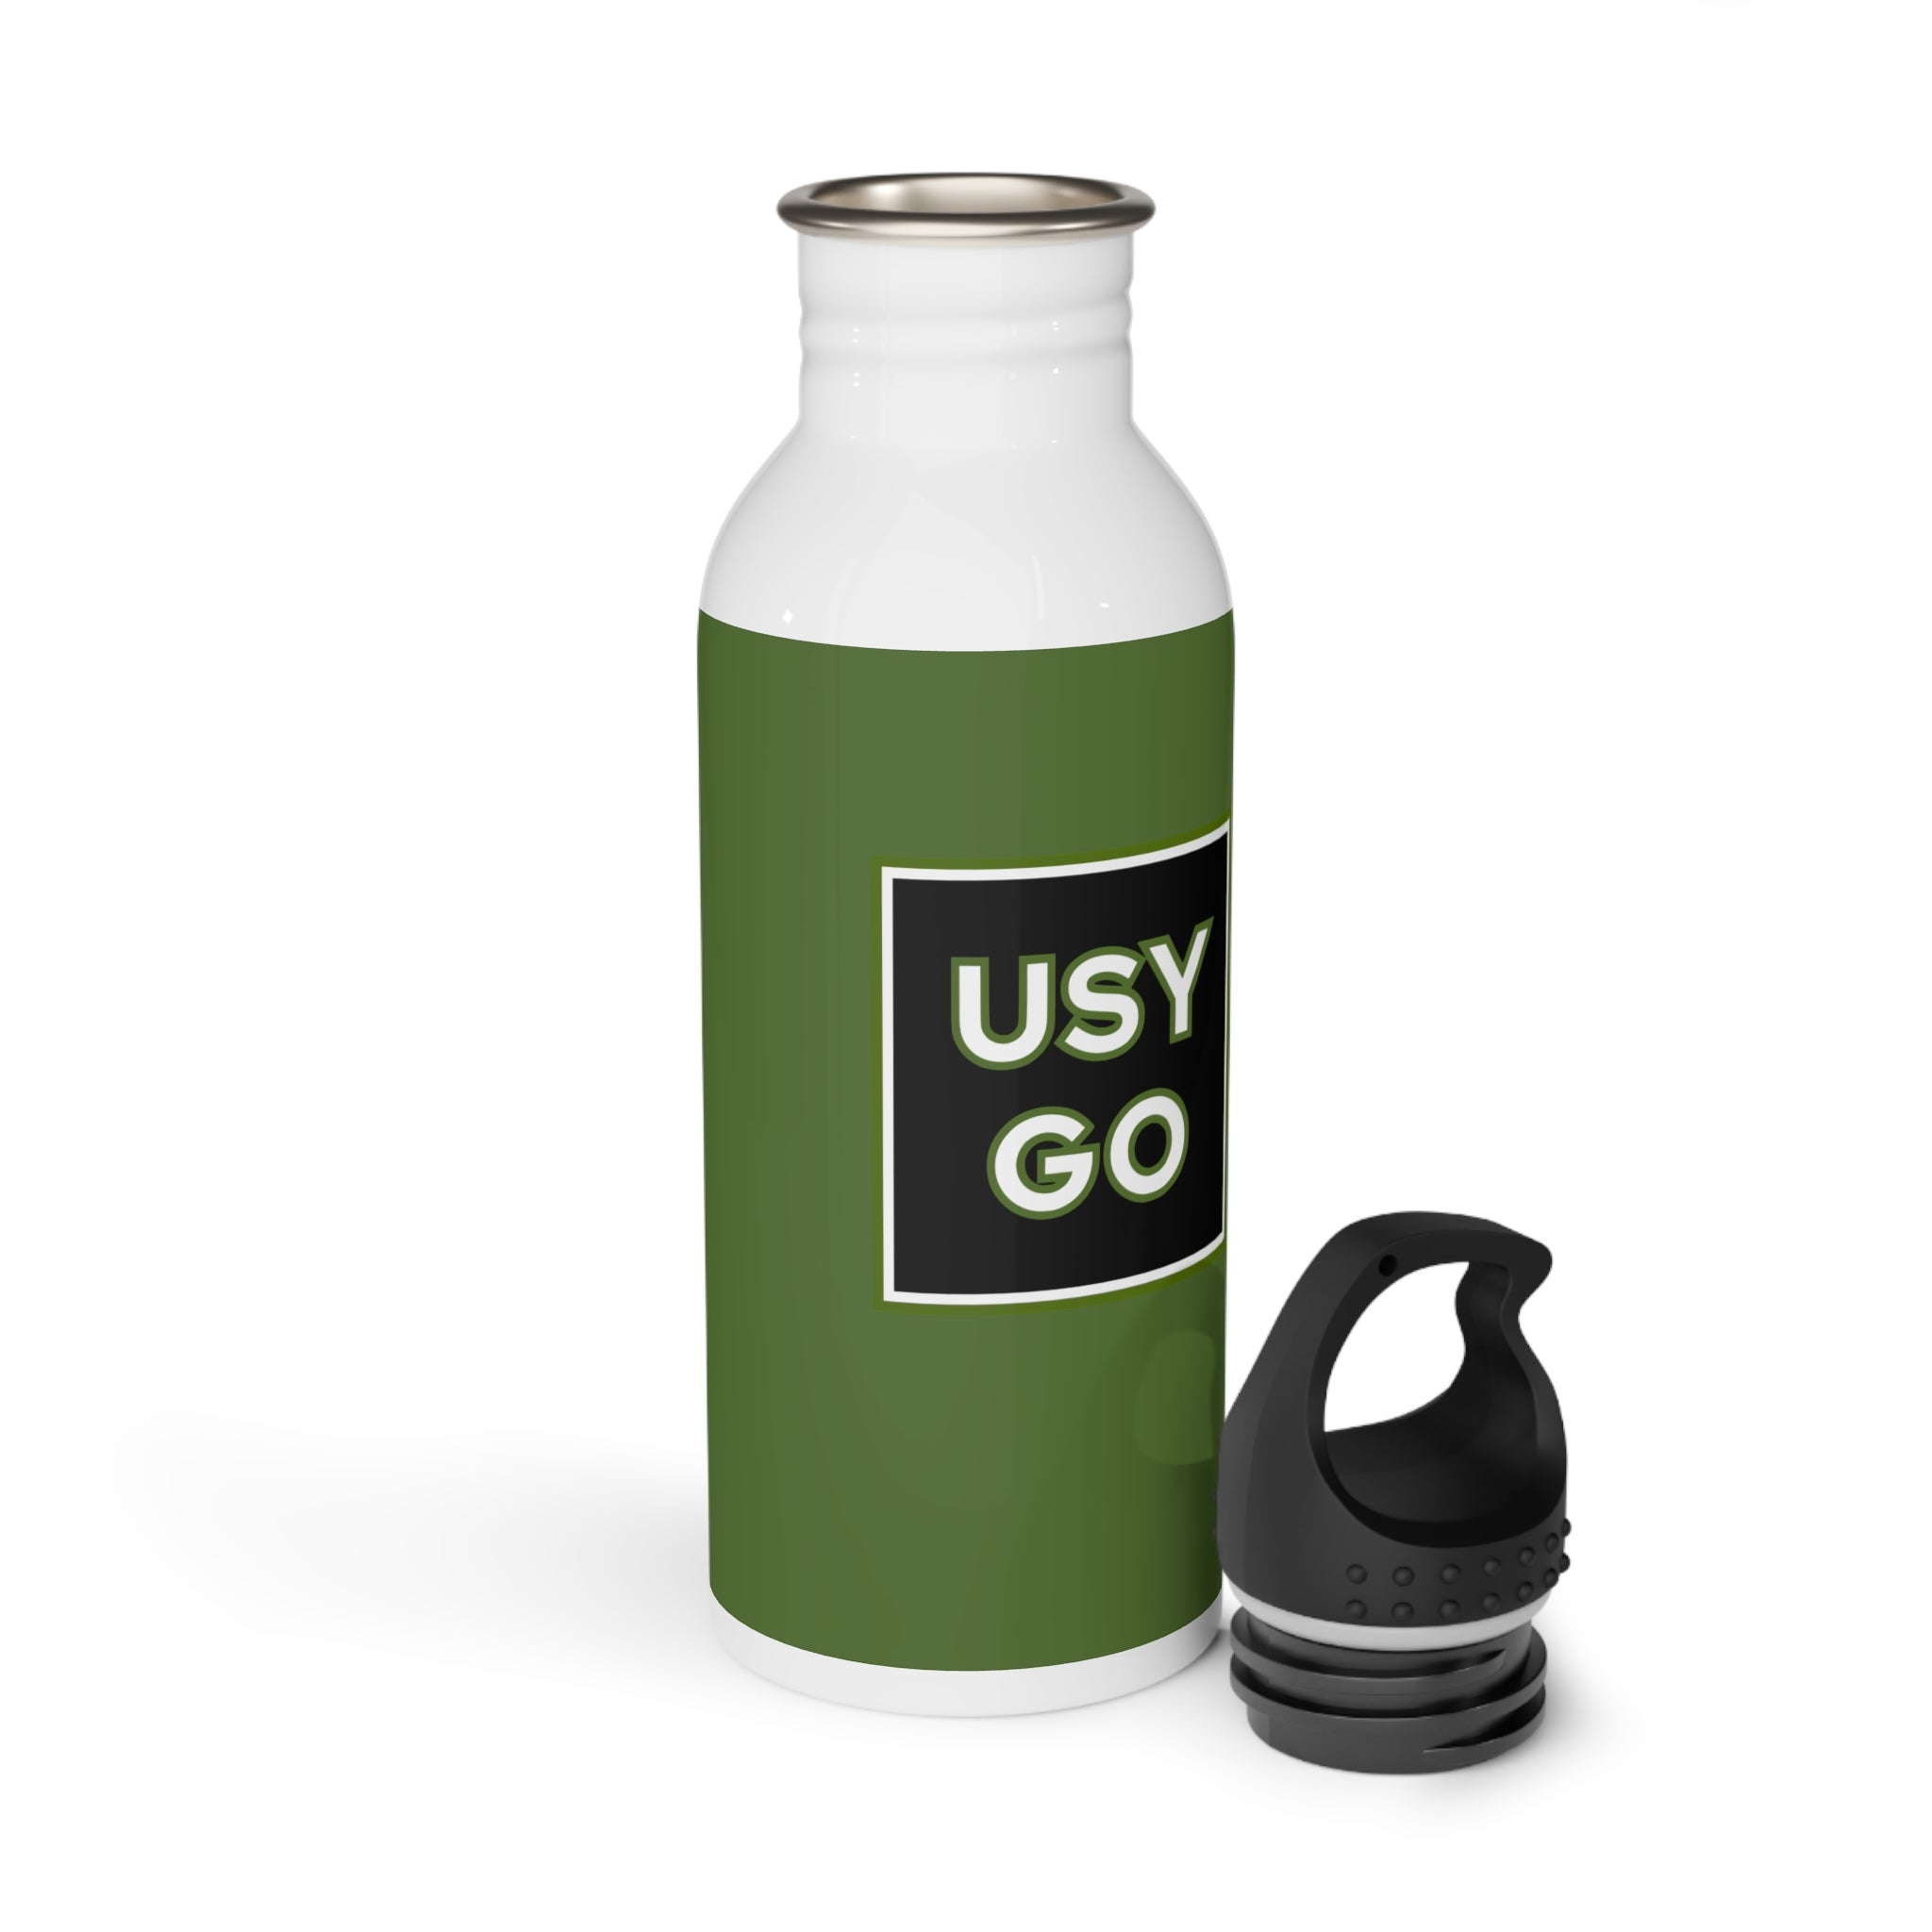 White and Olive Green USYGO Stainless Steel Water Bottle